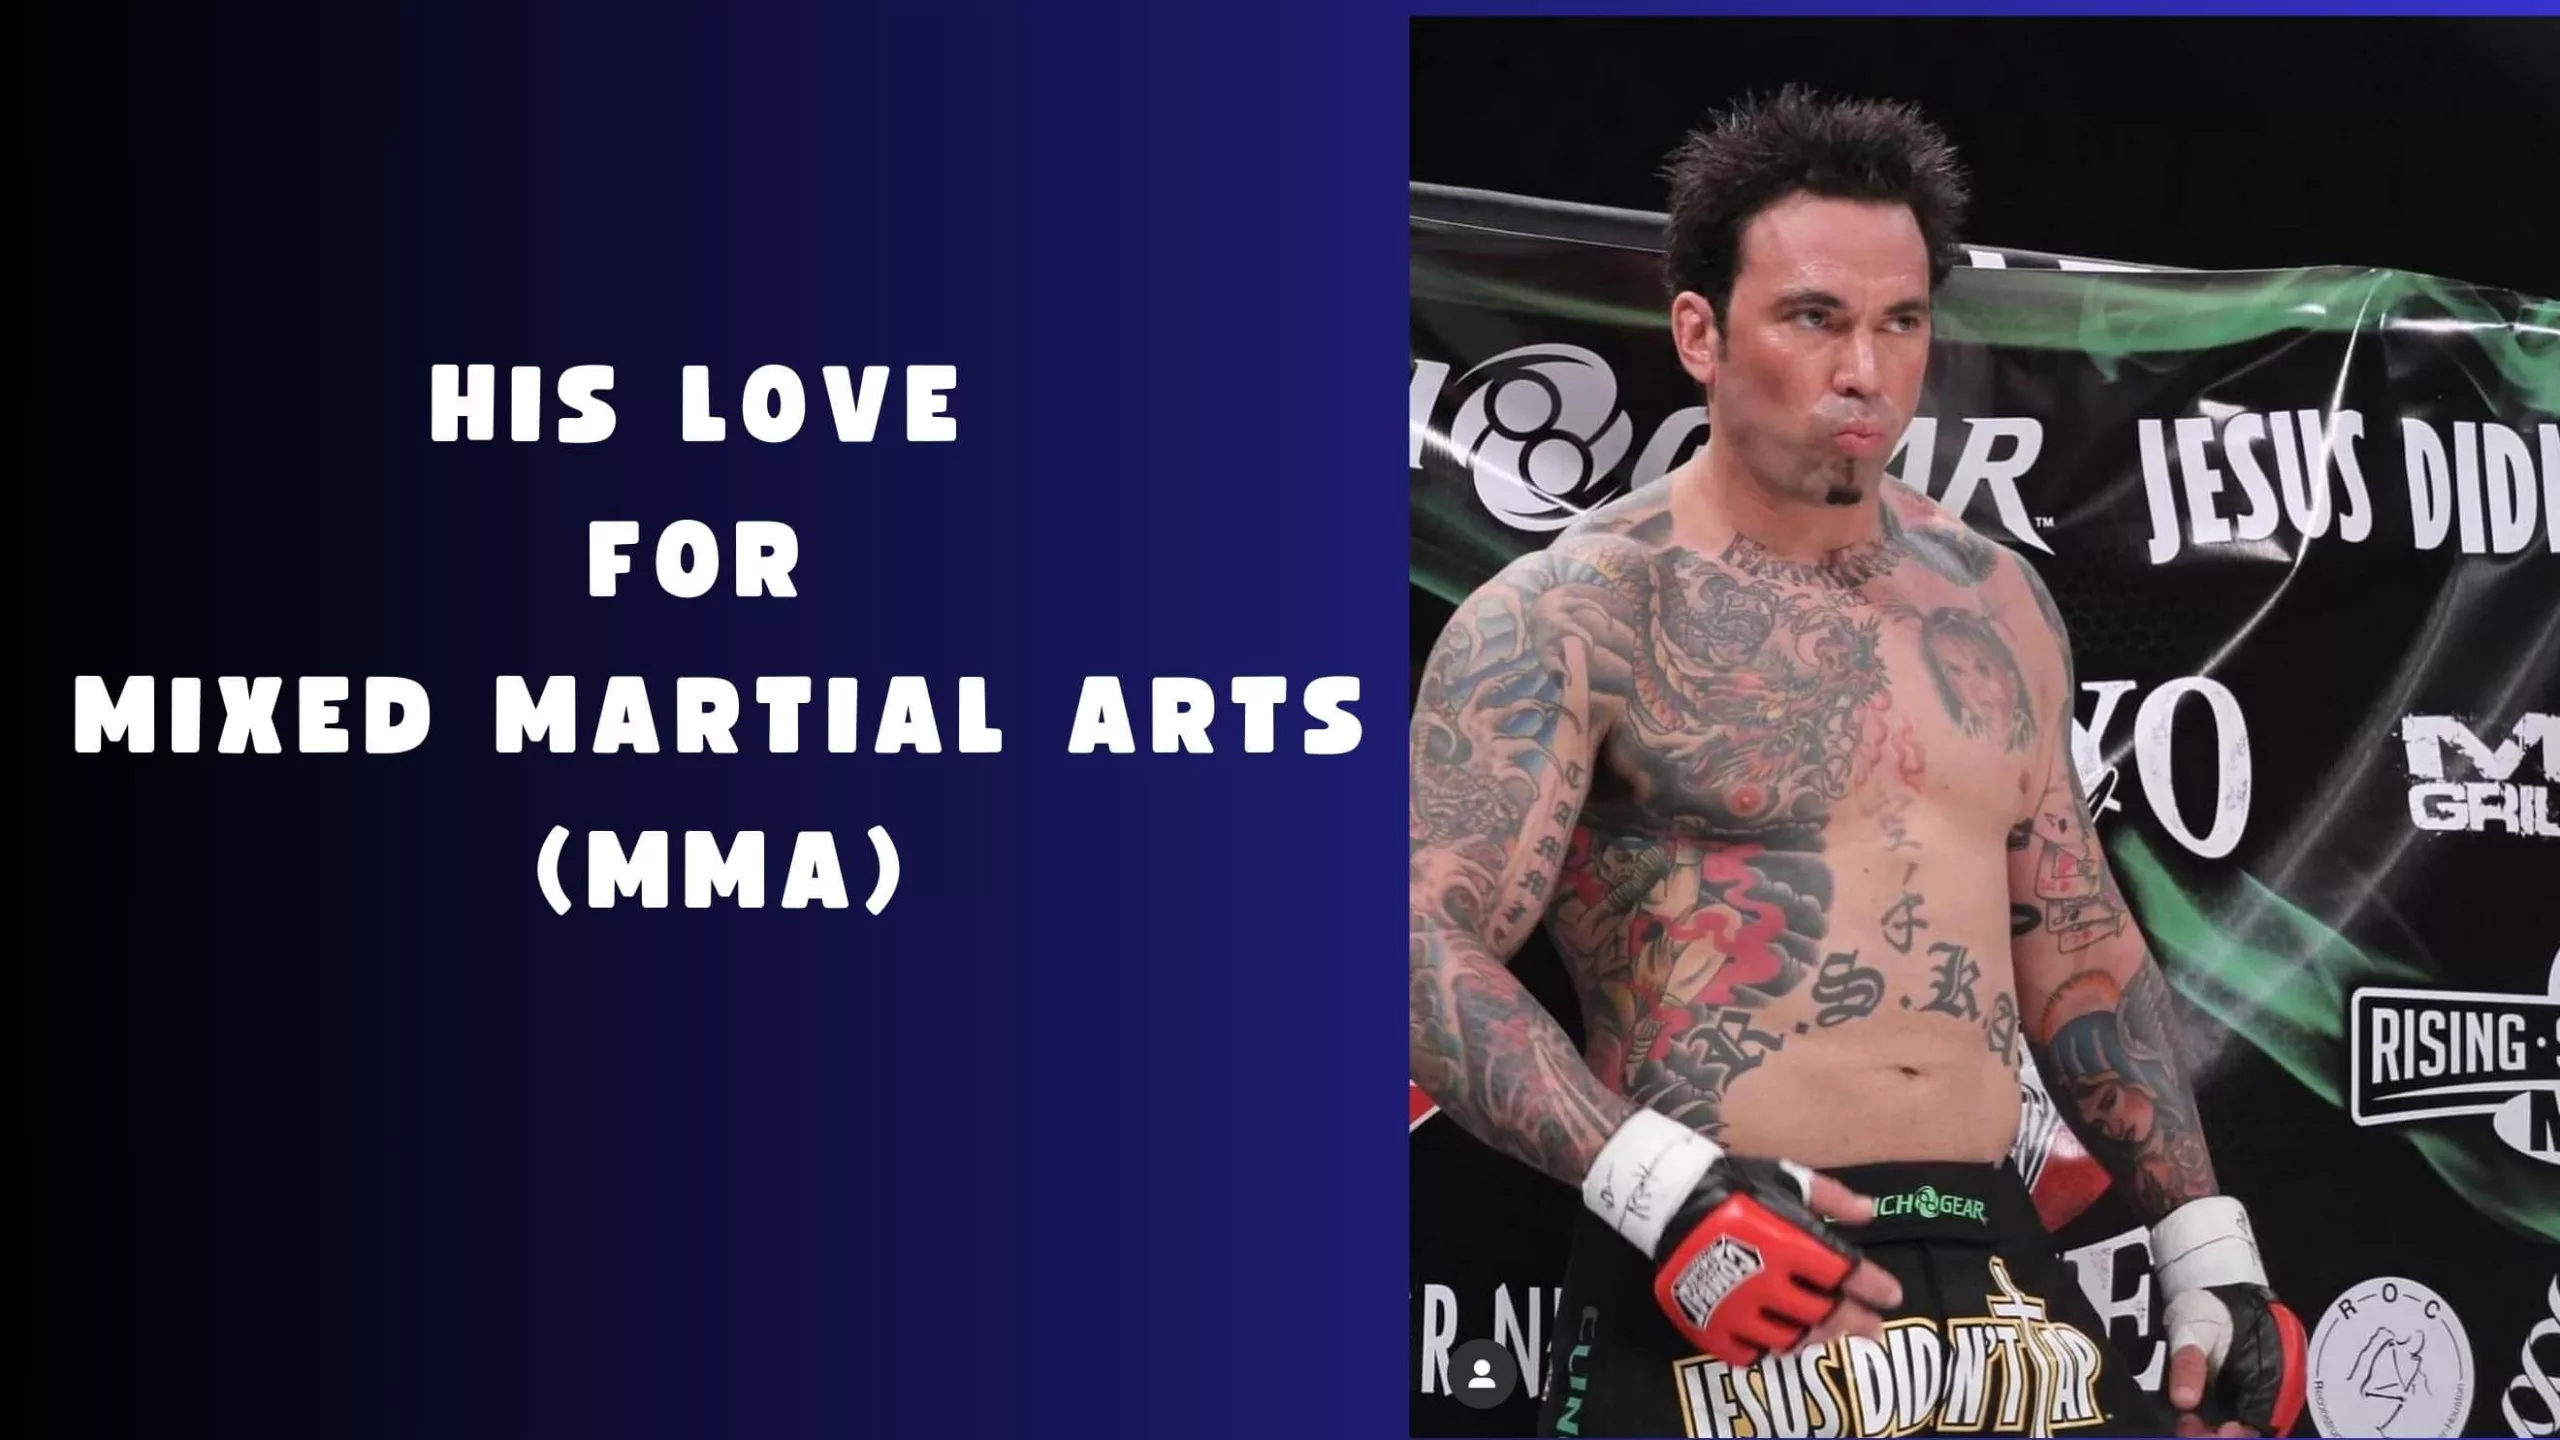 His love for Mixed Martial Arts (MMA)